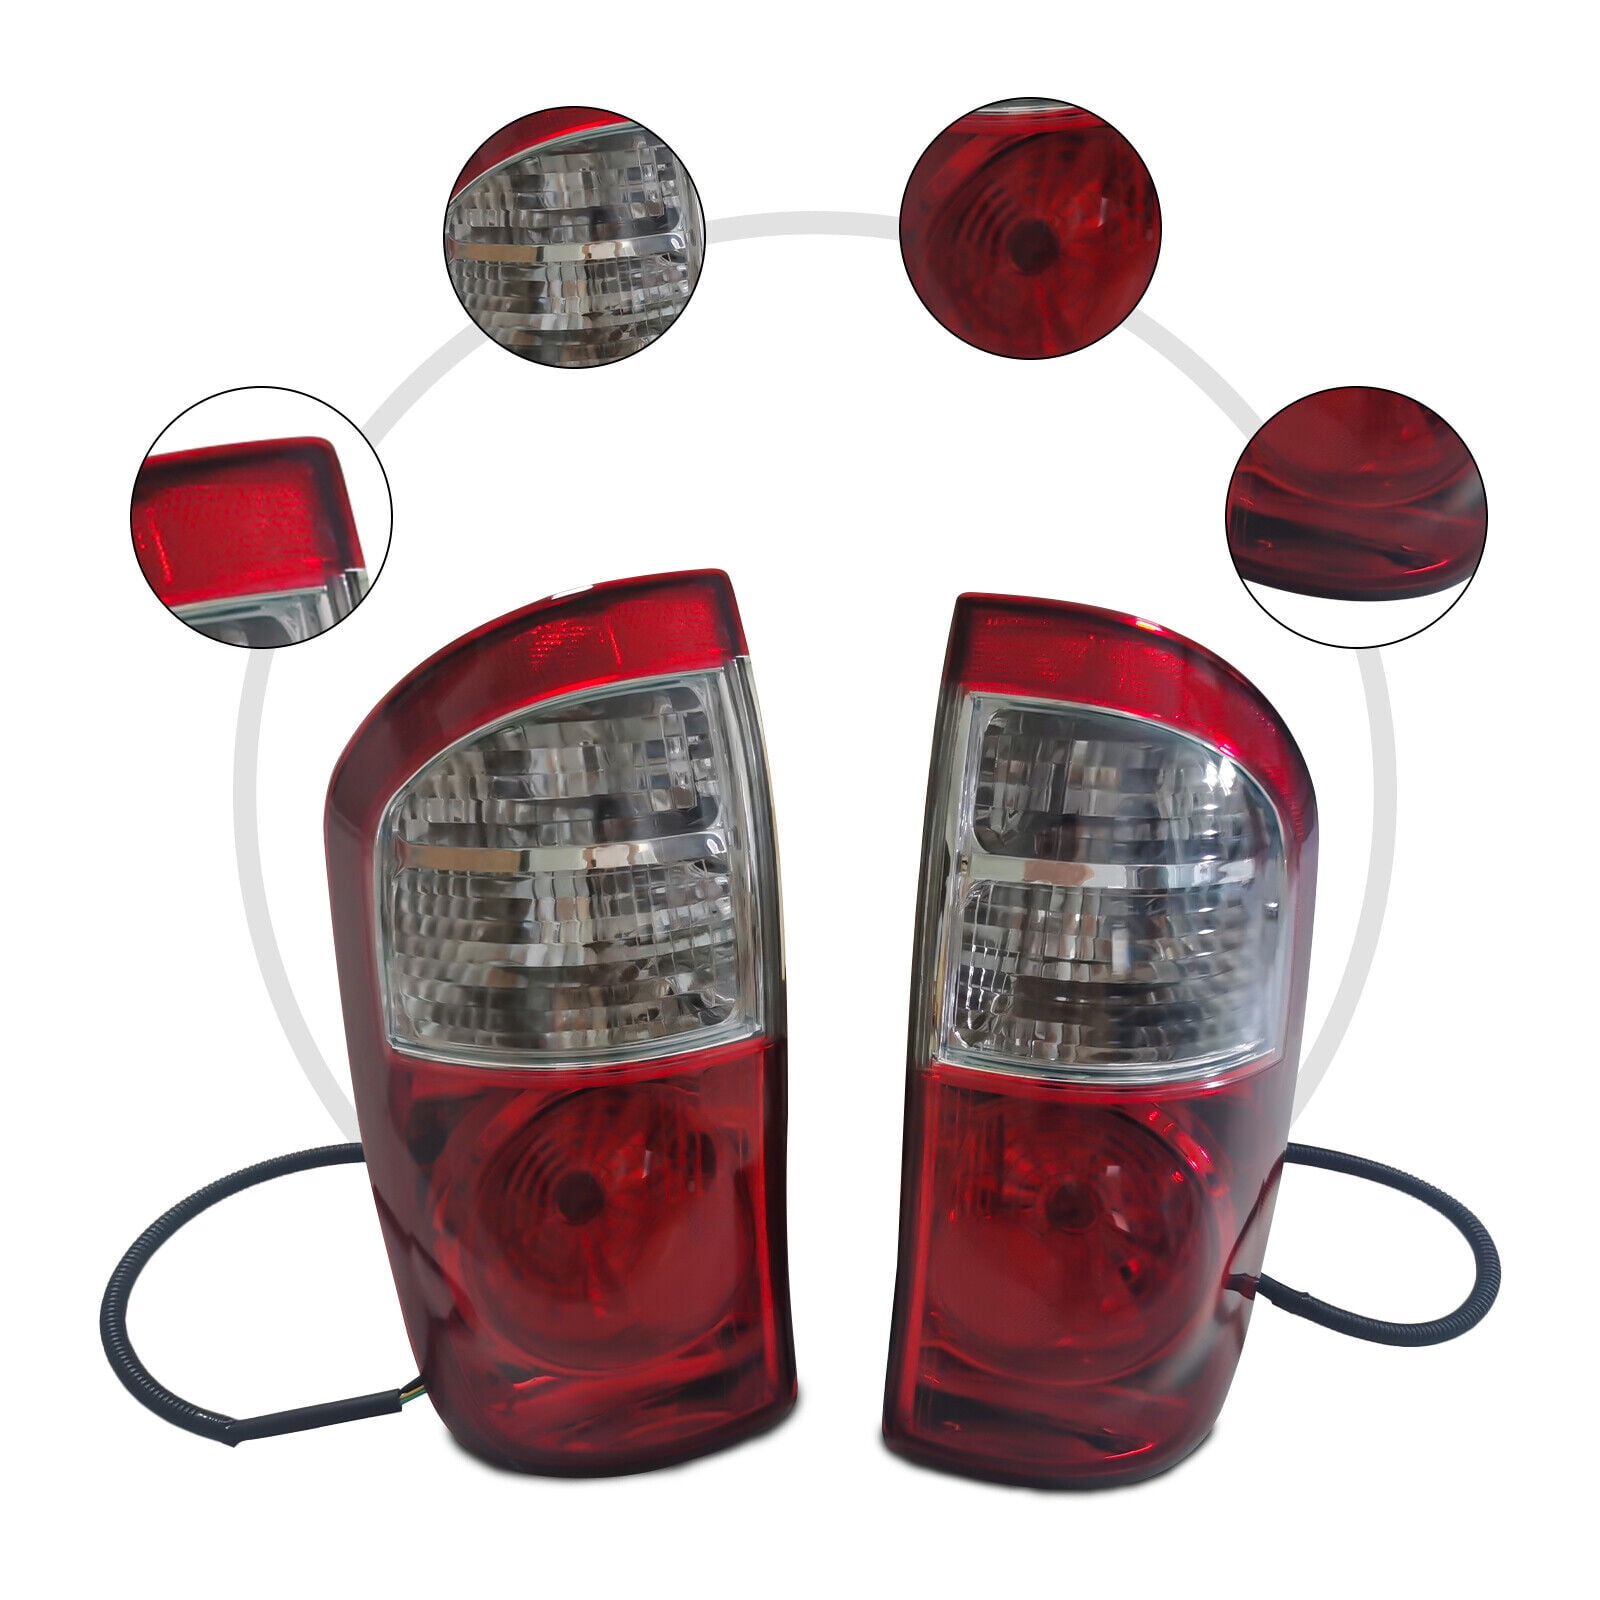 Driver and Passenger Taillights Tail Lamps with Clear-Red Lens Replacement for Toyota Pickup Truck 815600C060 815500C060 